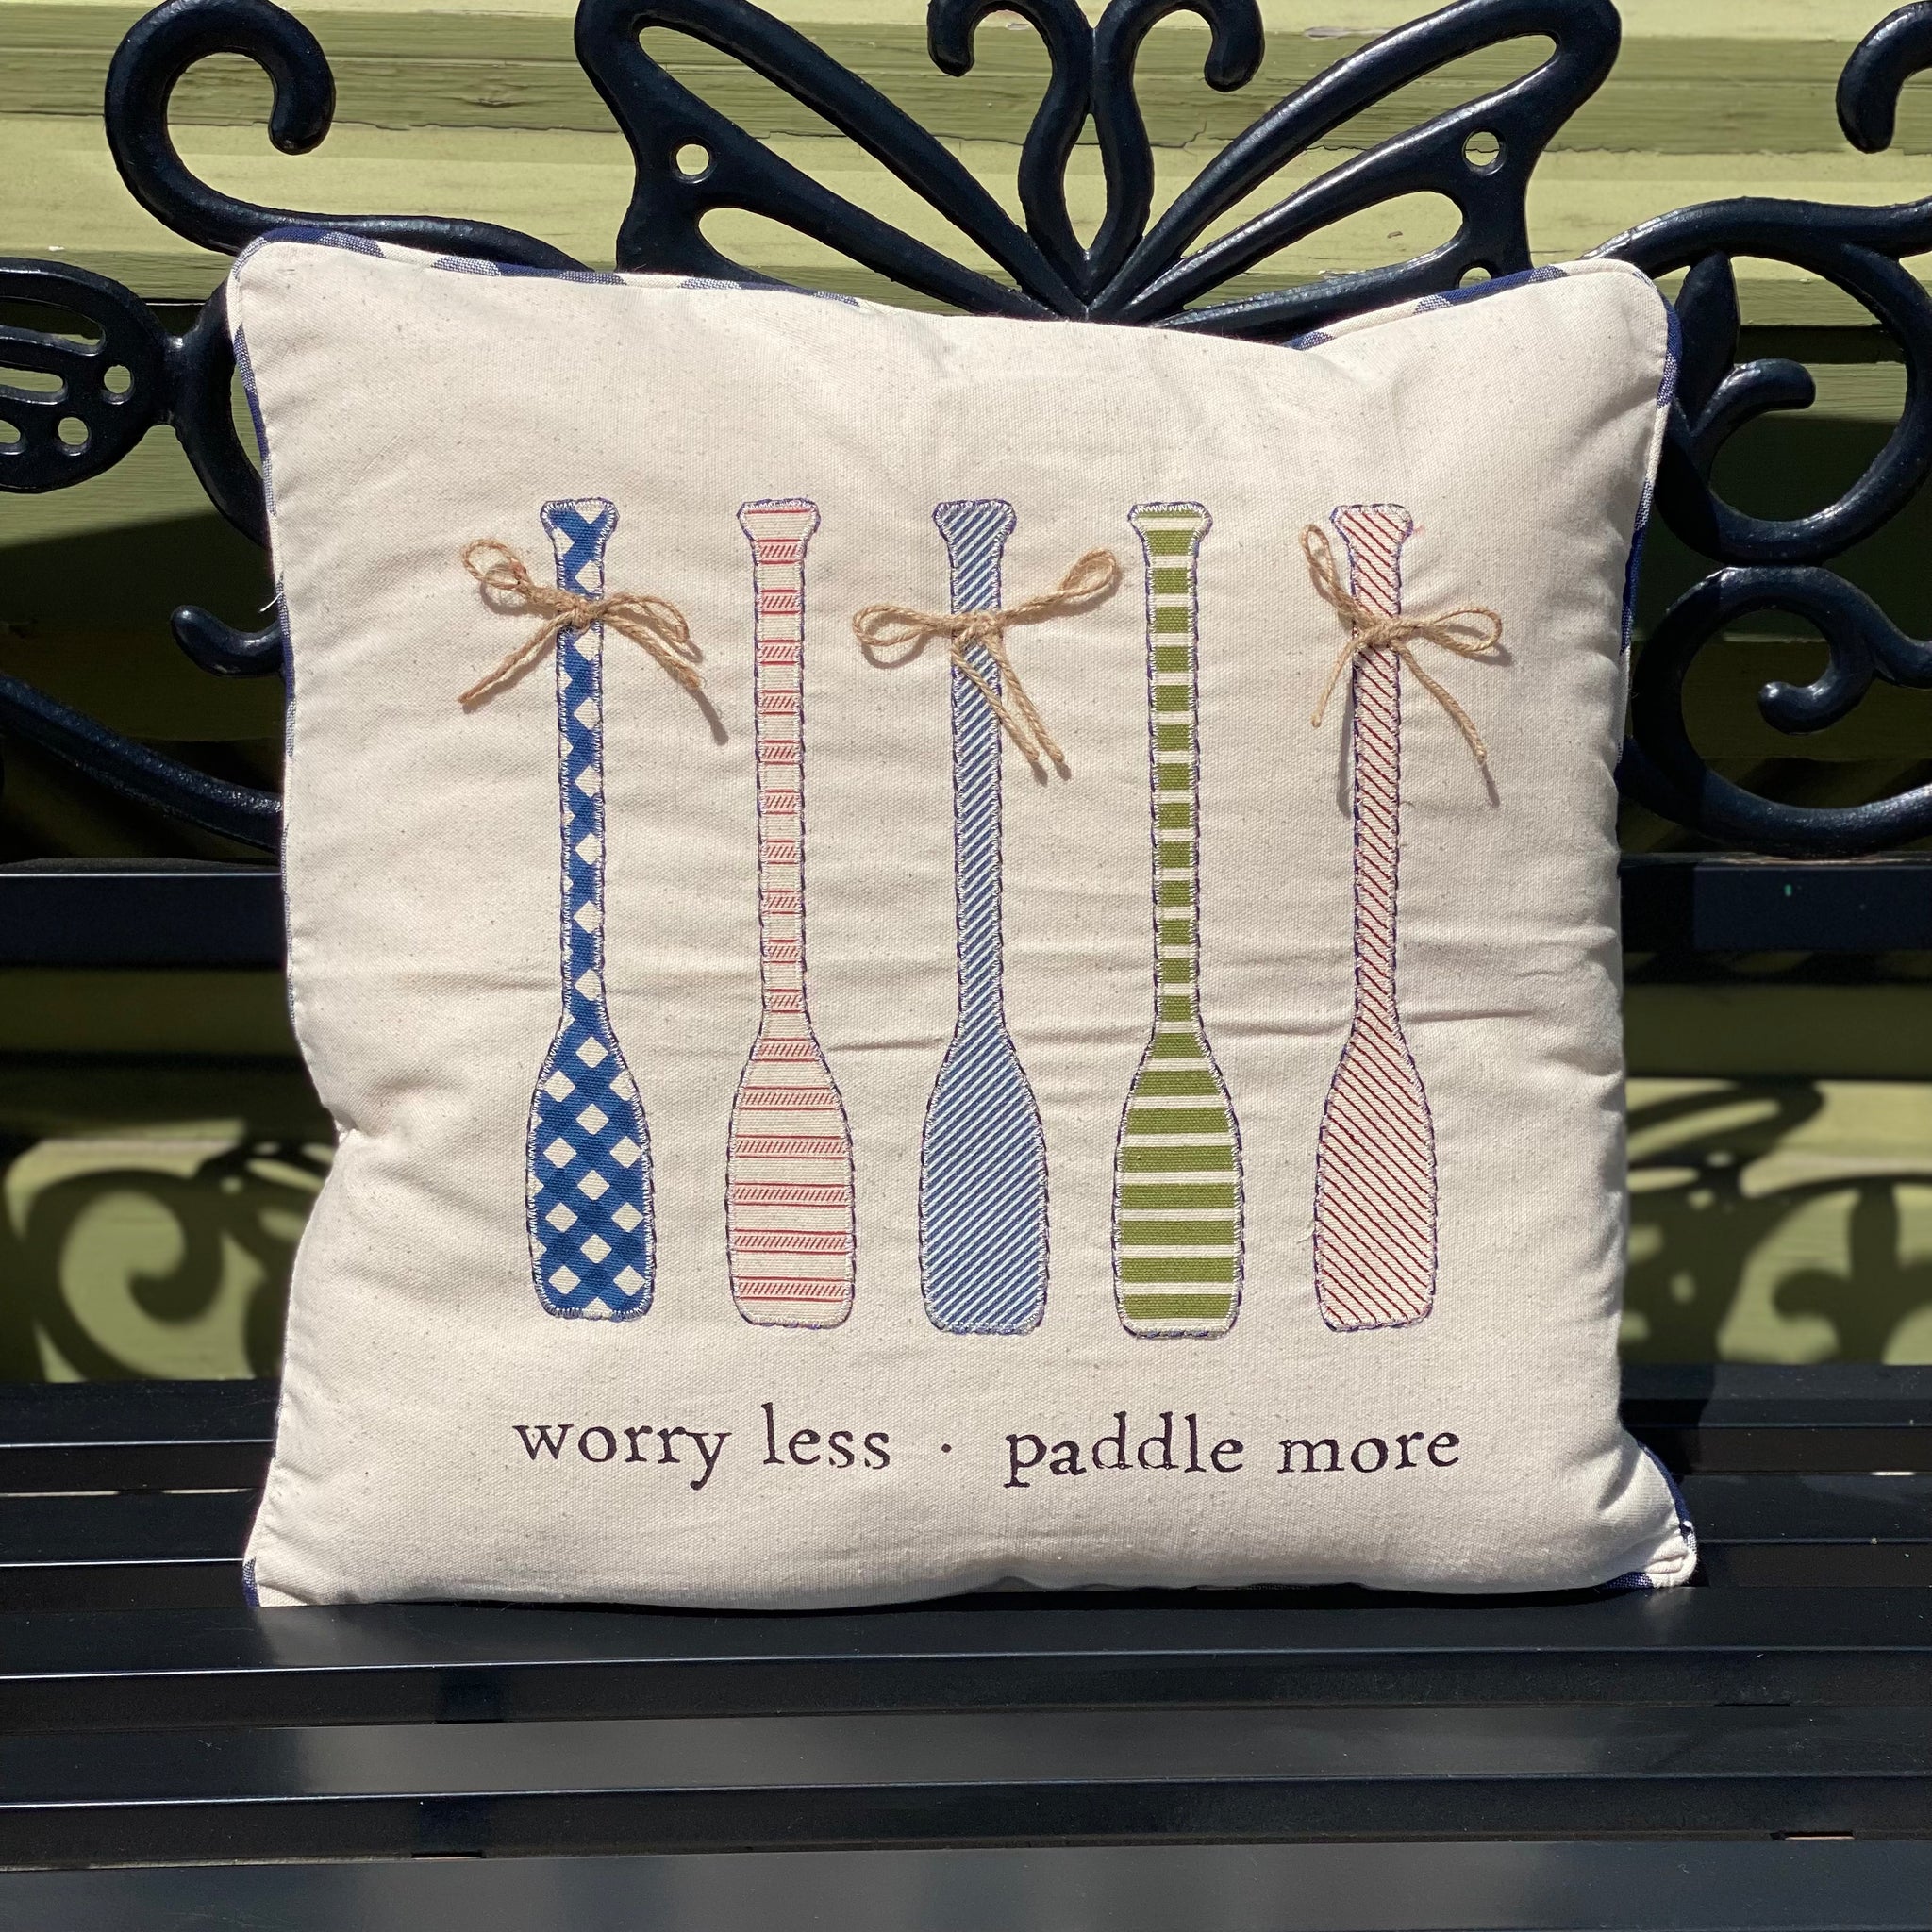 Worry less paddle more pillow